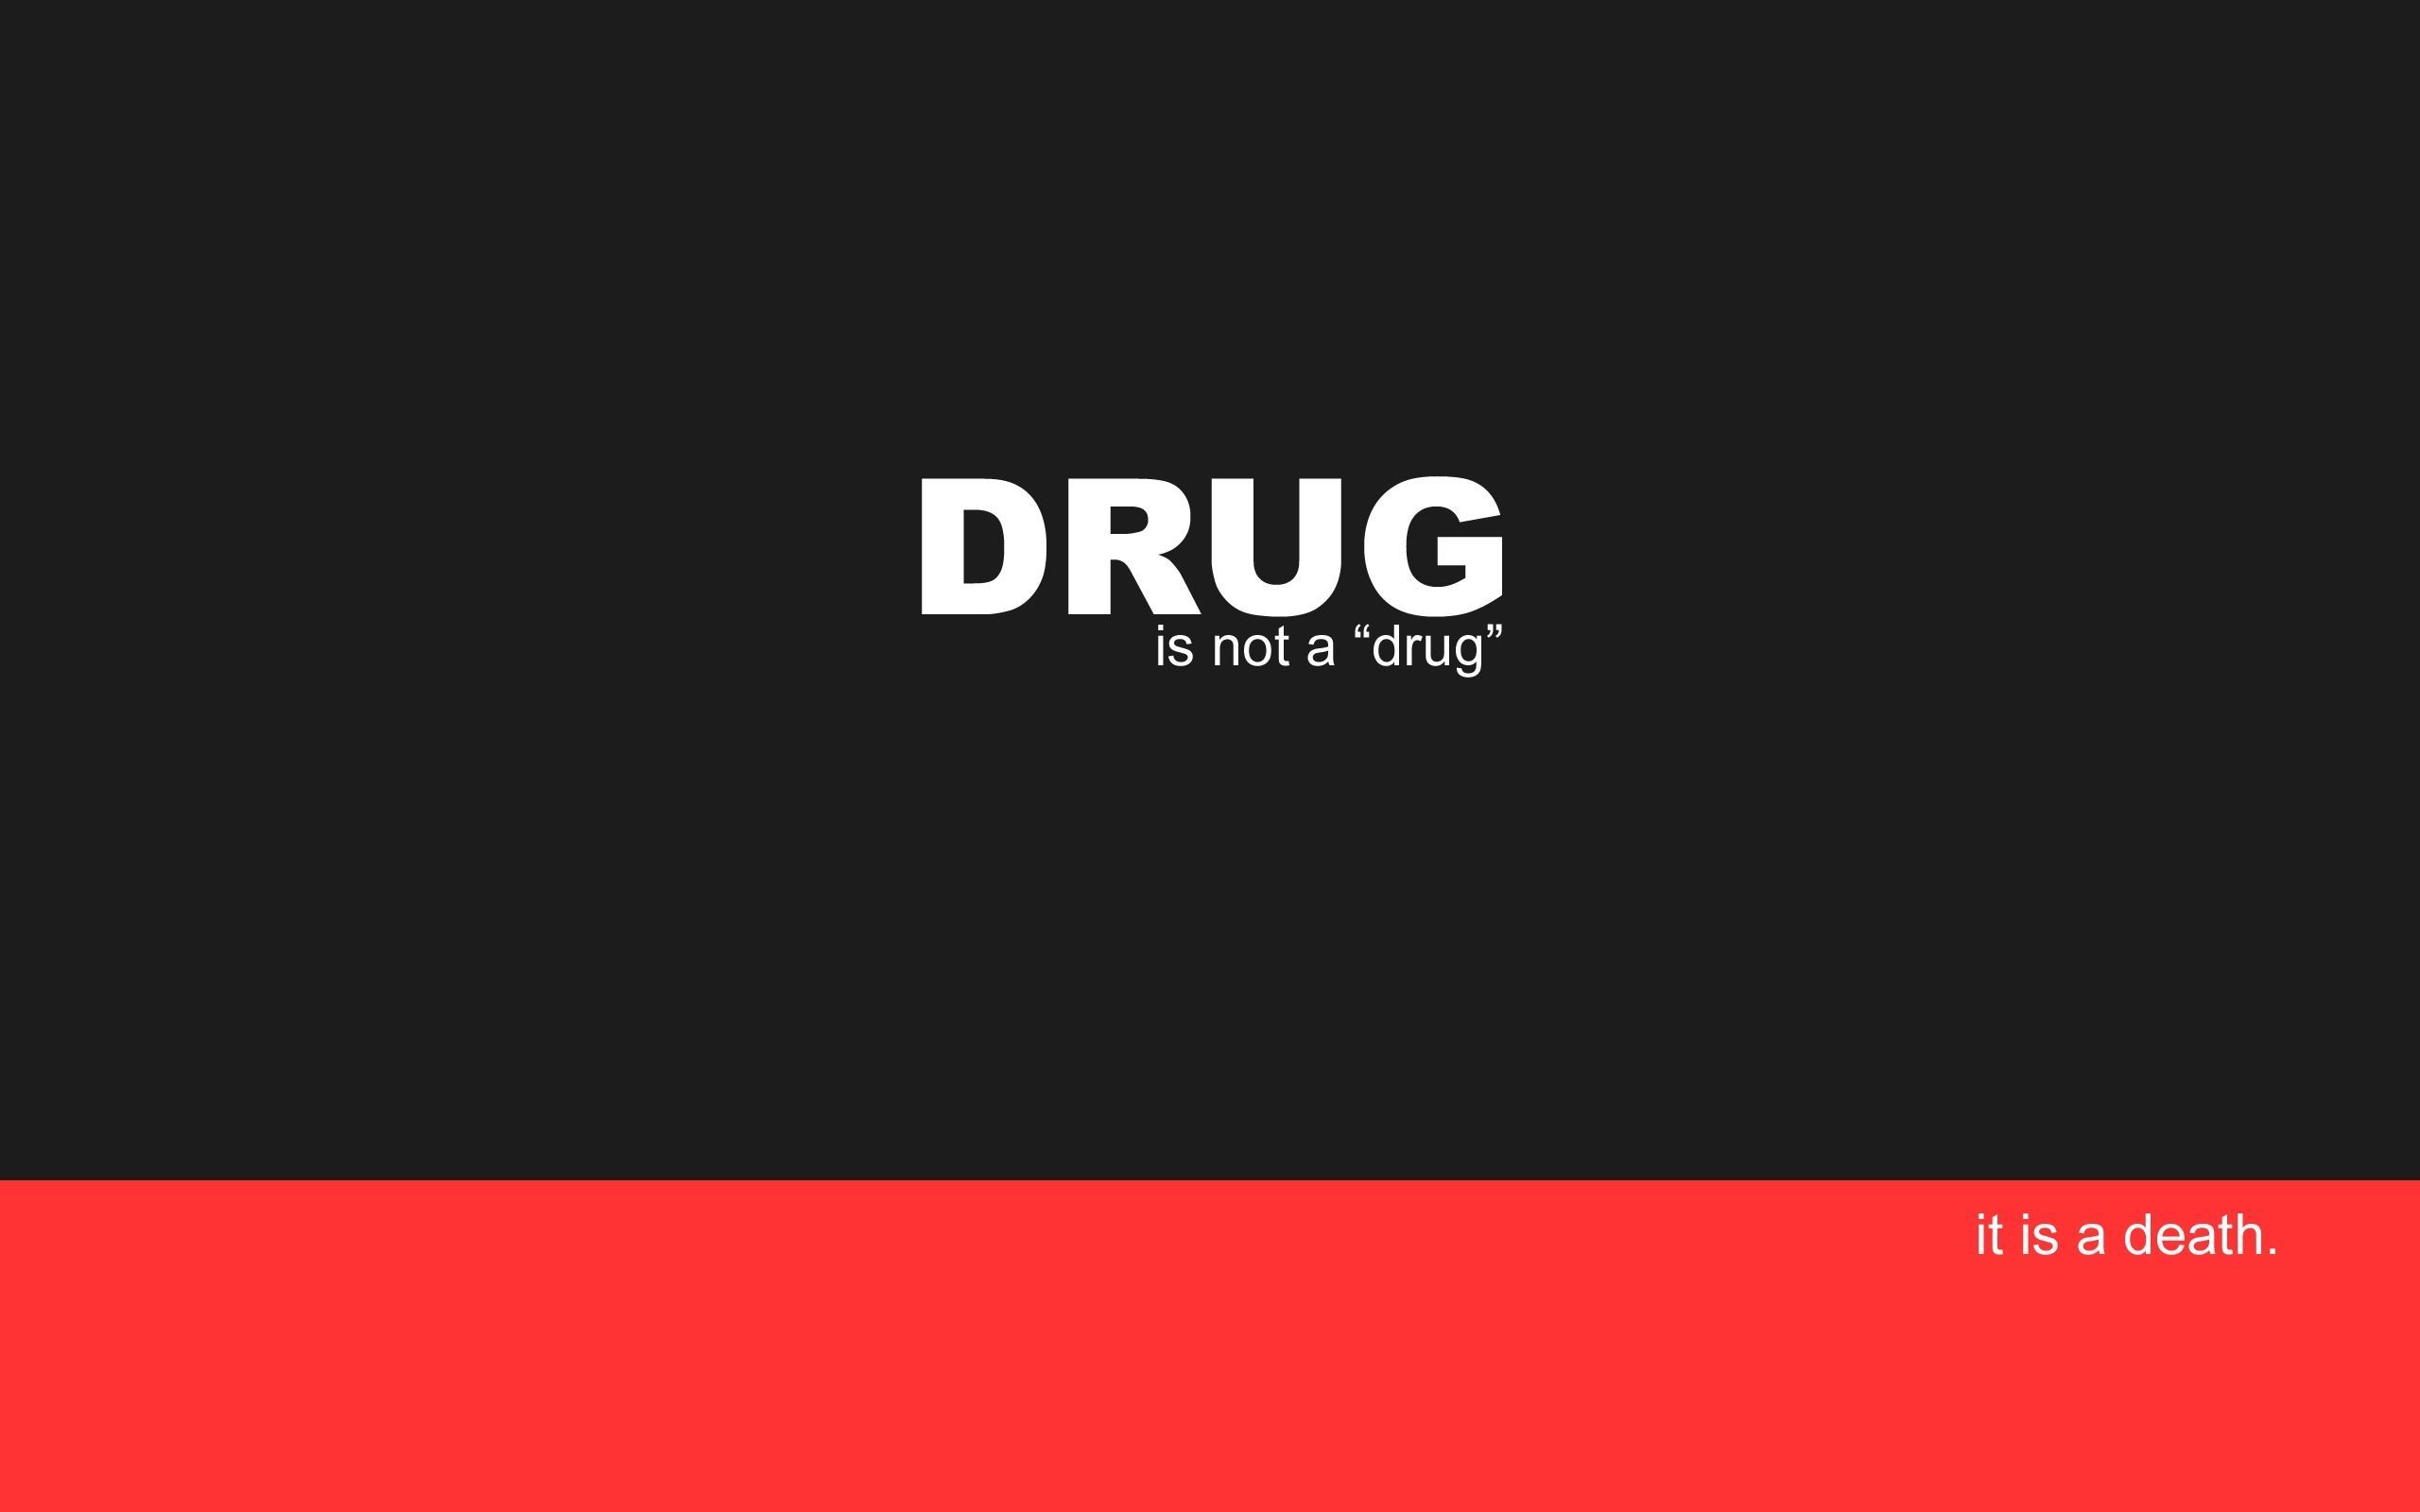 Beautiful image of drugs death, image of the drug is not a drug, social advertisement